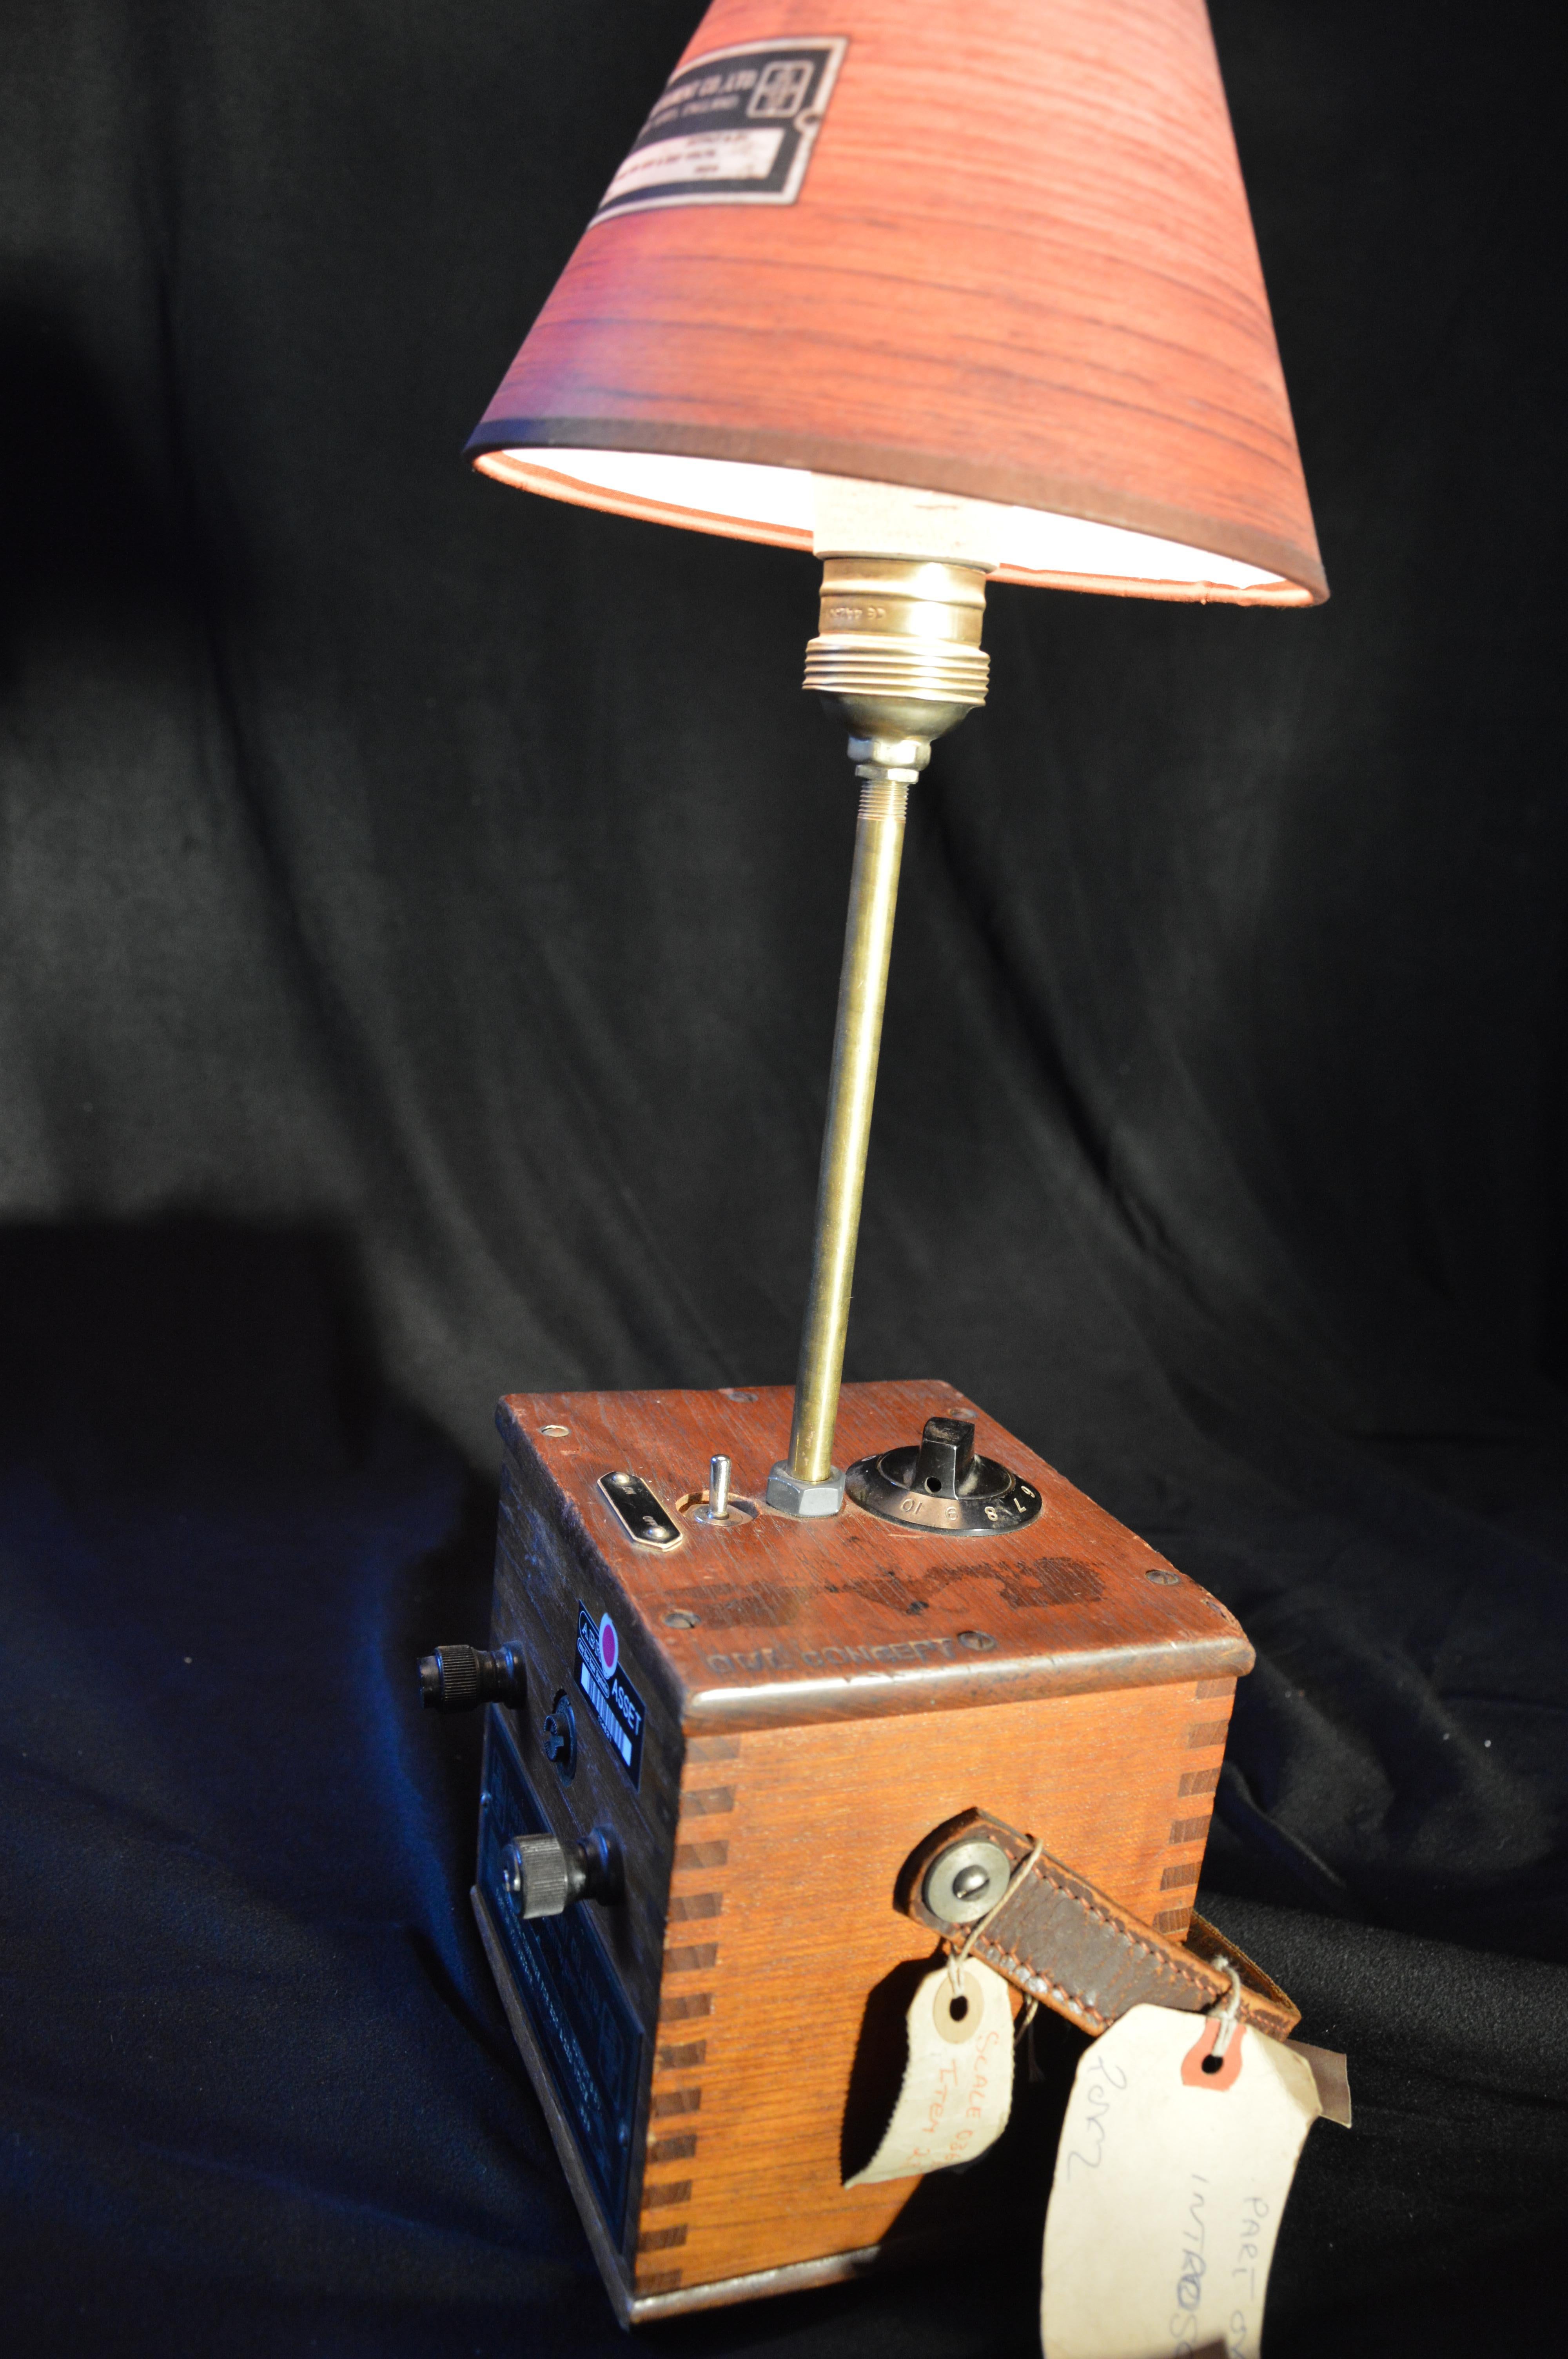 The lamp’s design is based on the apparatus by Foster Instrument Co. Ltd England,
whose origins date back to 1910. The device was made in 1959 and functioned as a transformer.
This item was supplied by the British Army, which is confirmed by the